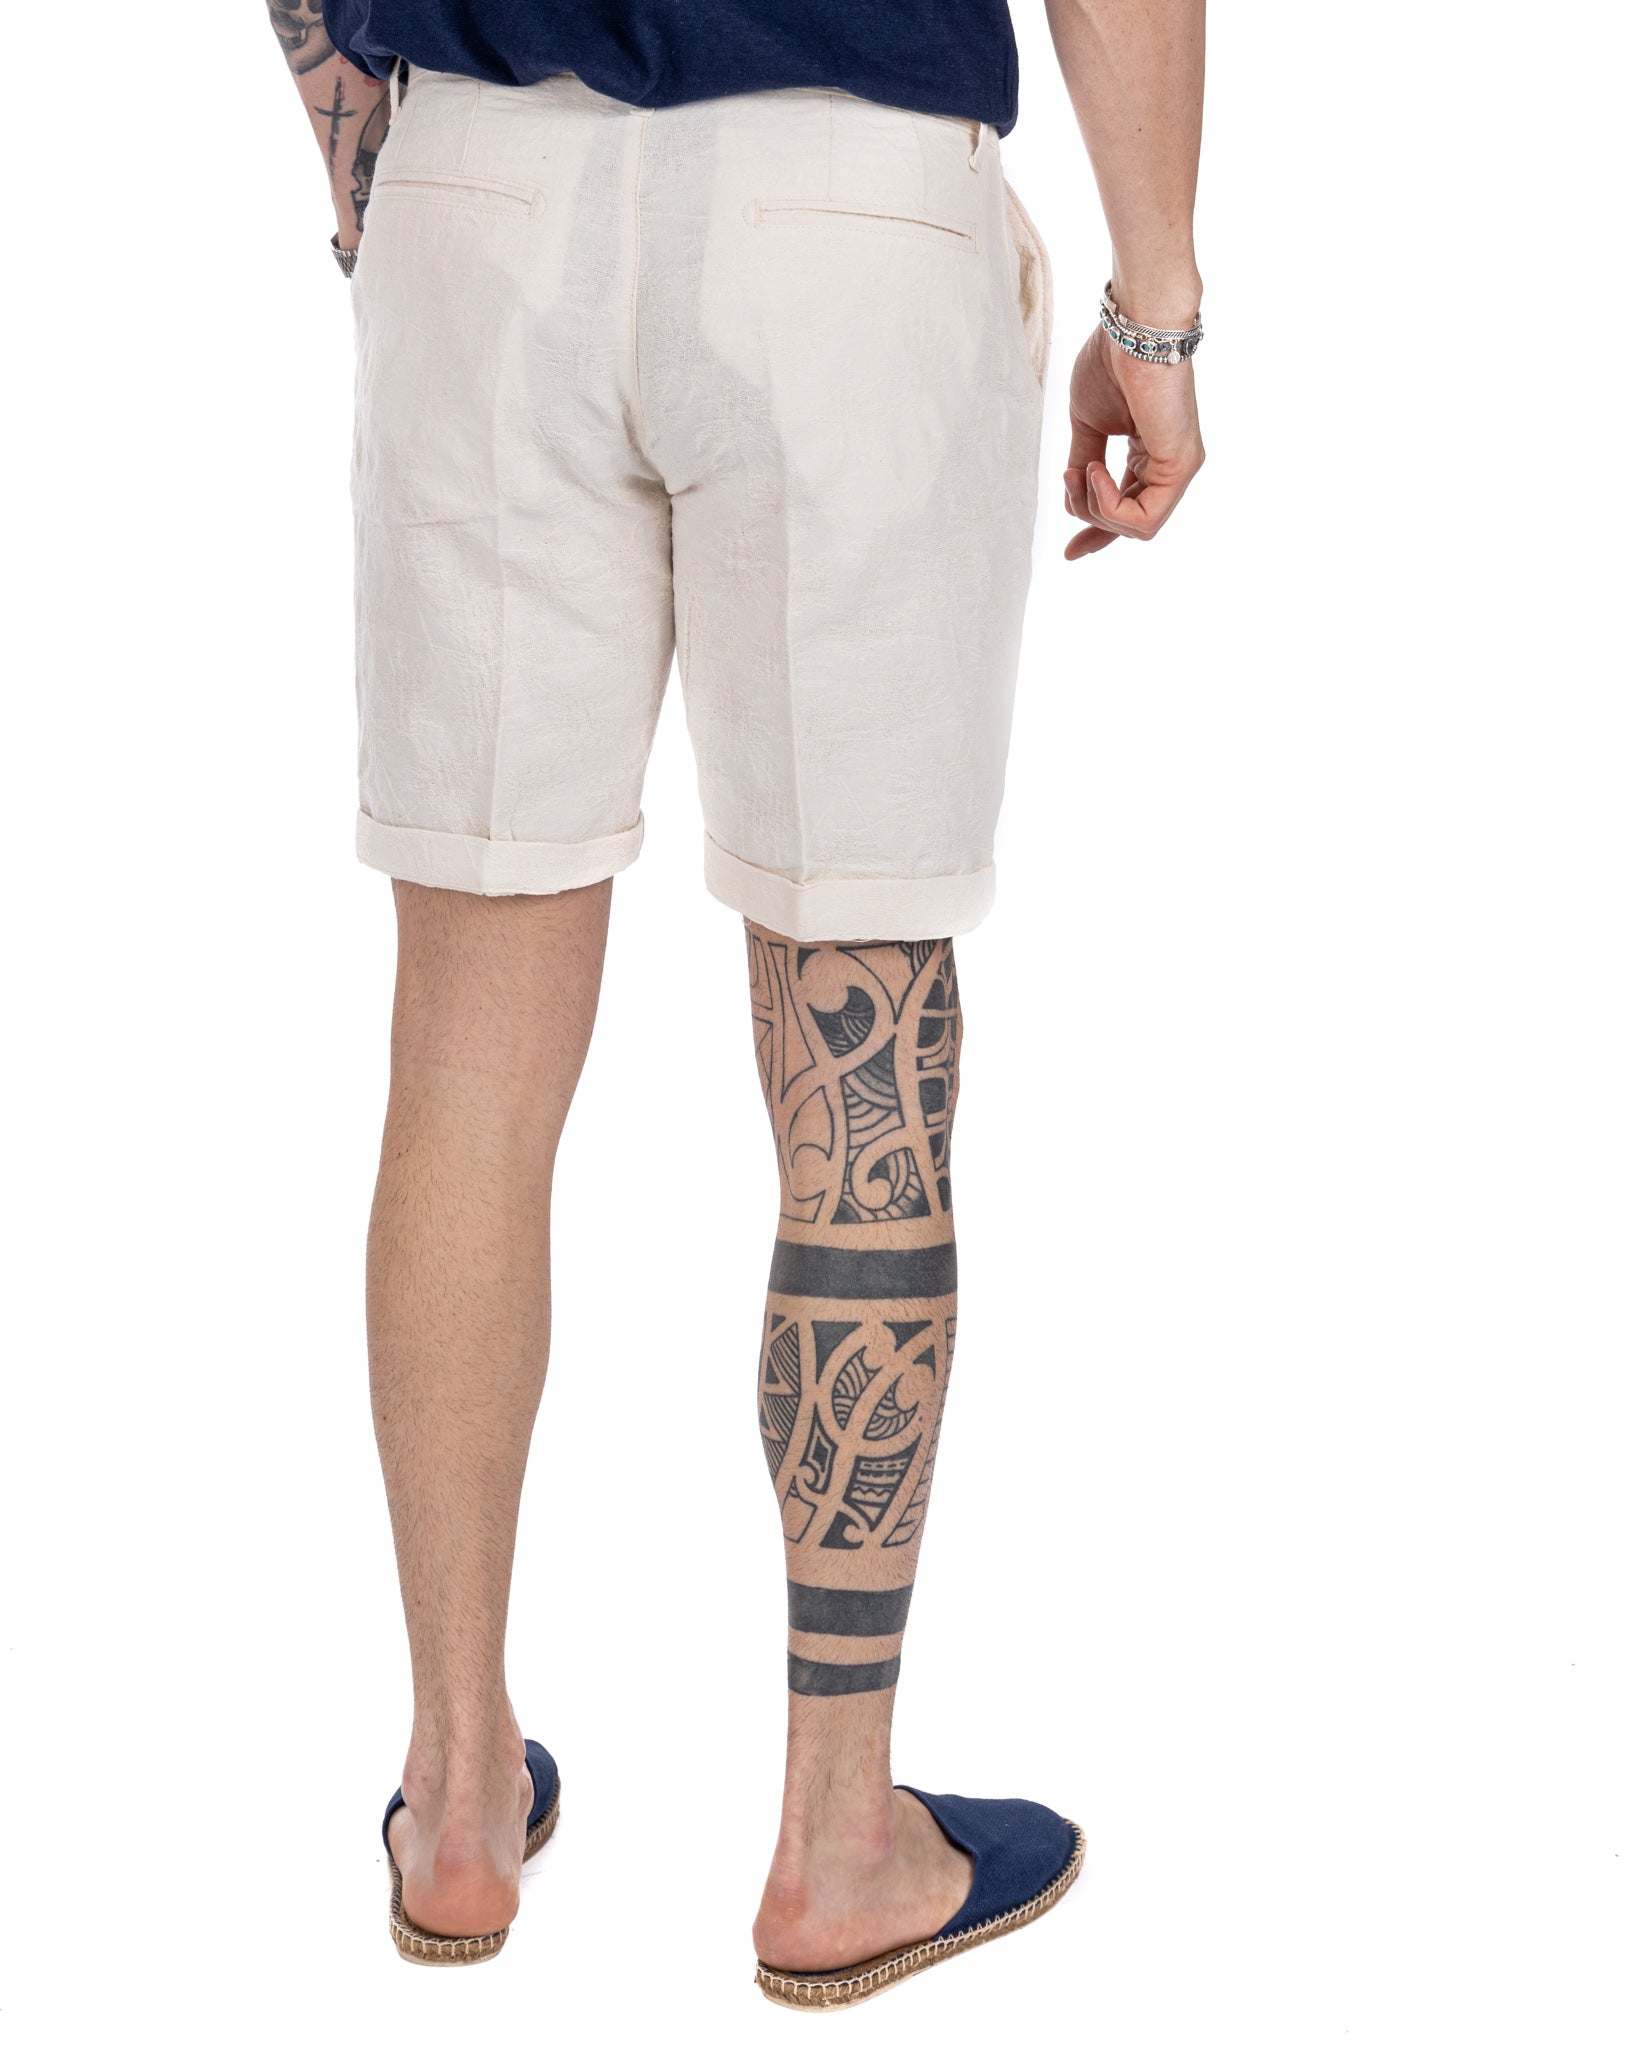 Bahama - white Bermuda shorts with relief pattern